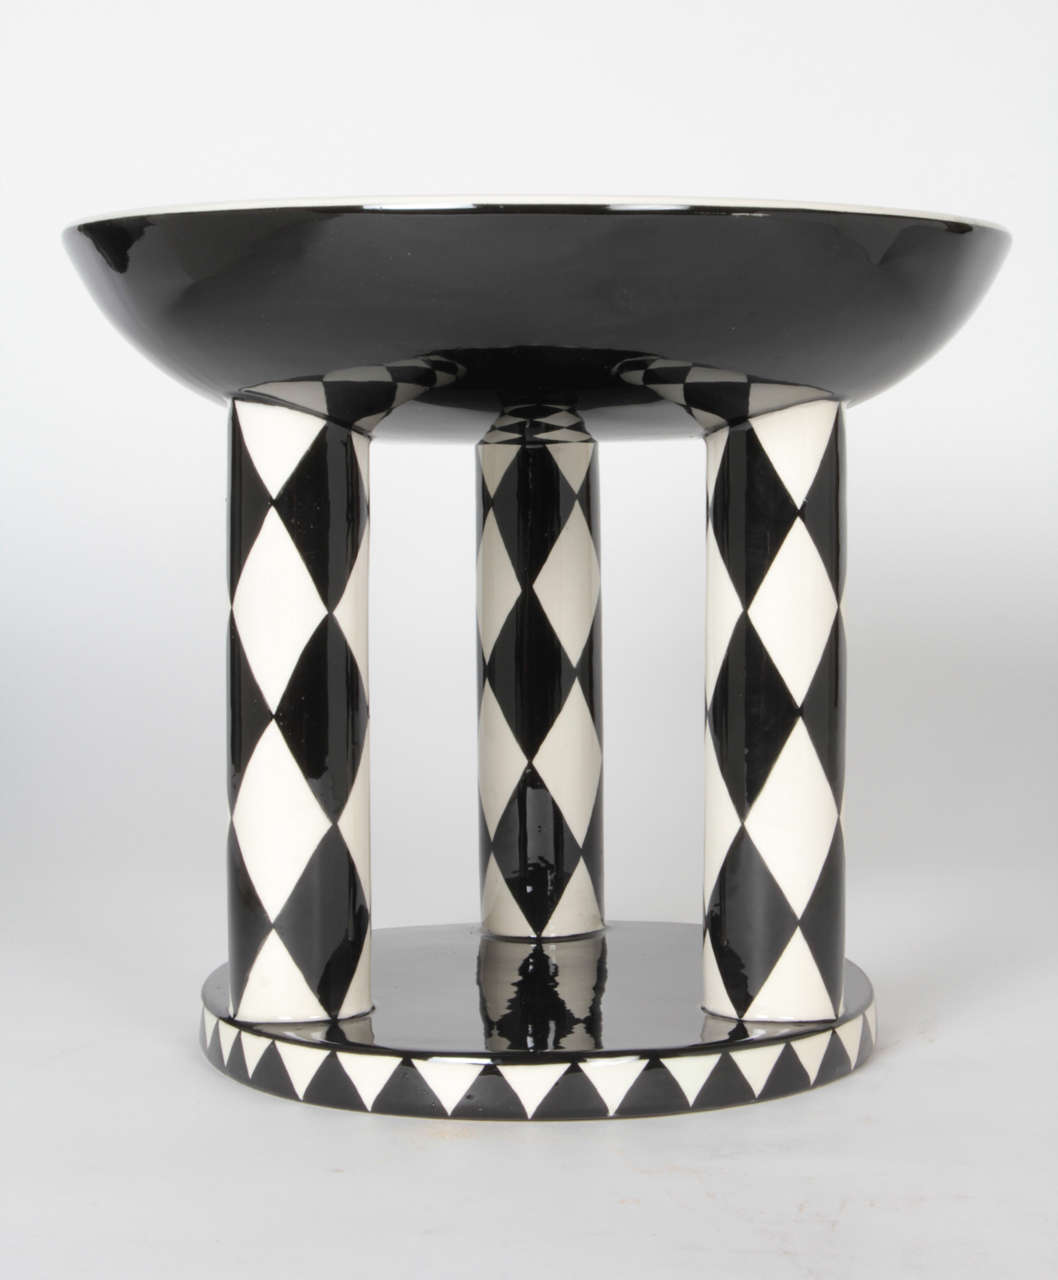 Michael Powolny for Wiener Werkstätte Vienna Secession Centerpiece Bowl, 1906 In Excellent Condition For Sale In New York, NY